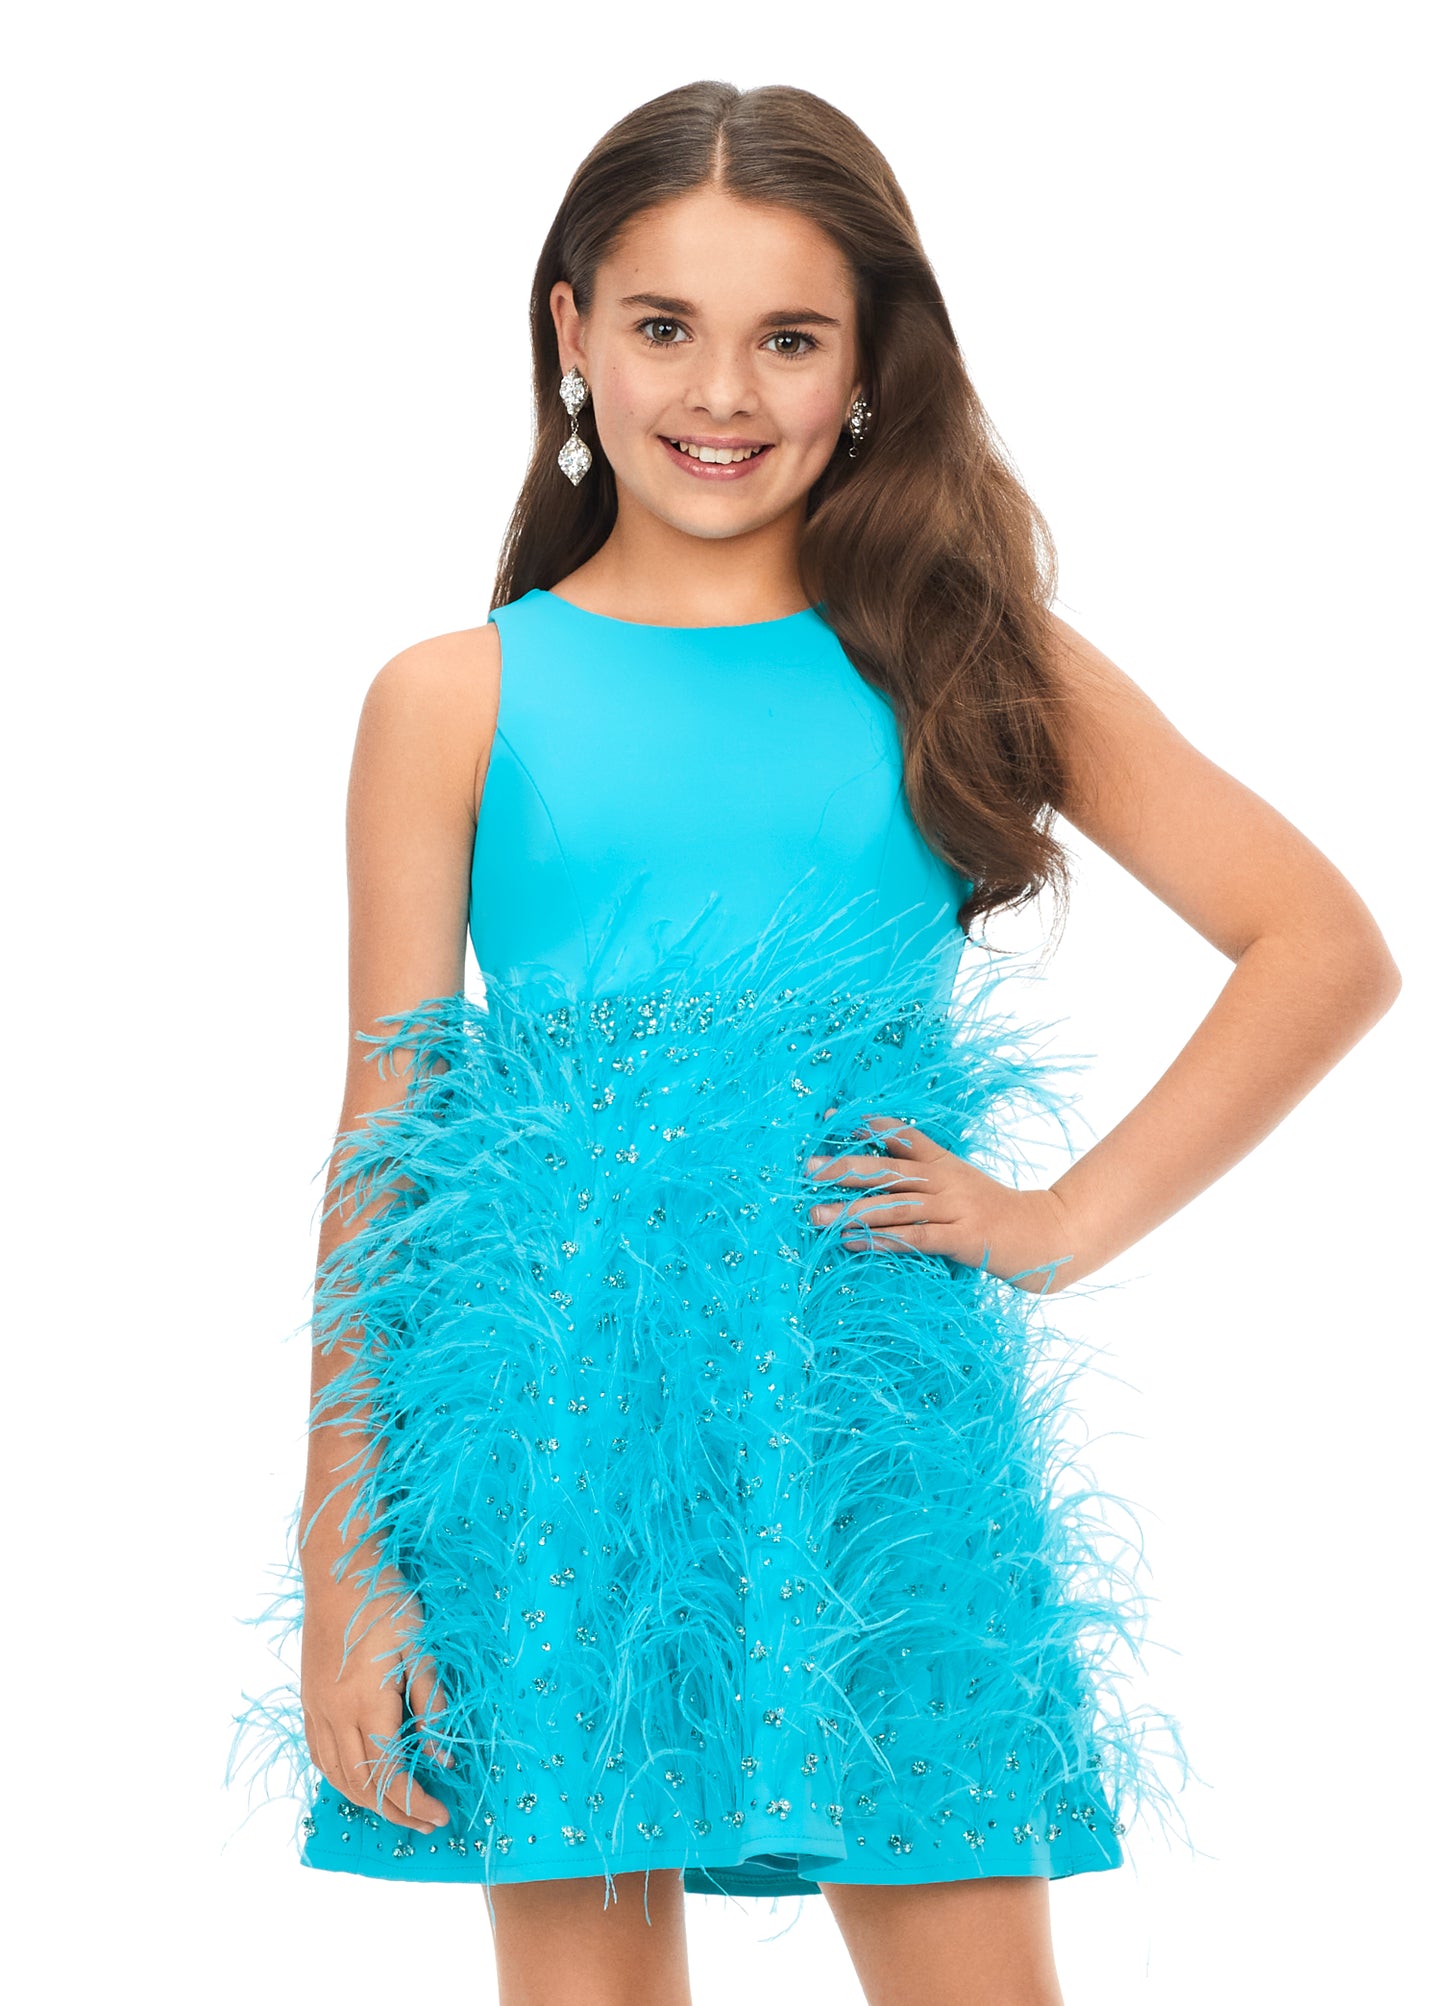 Ashley Lauren Kids 8176 Girls Pageant Cocktail Dress with Feathers and Crystals  This fabulous feather cocktail dress features a crew neckline giving way to a crystal encrusted waistband. The full feather skirt is accented by scattered crystals.